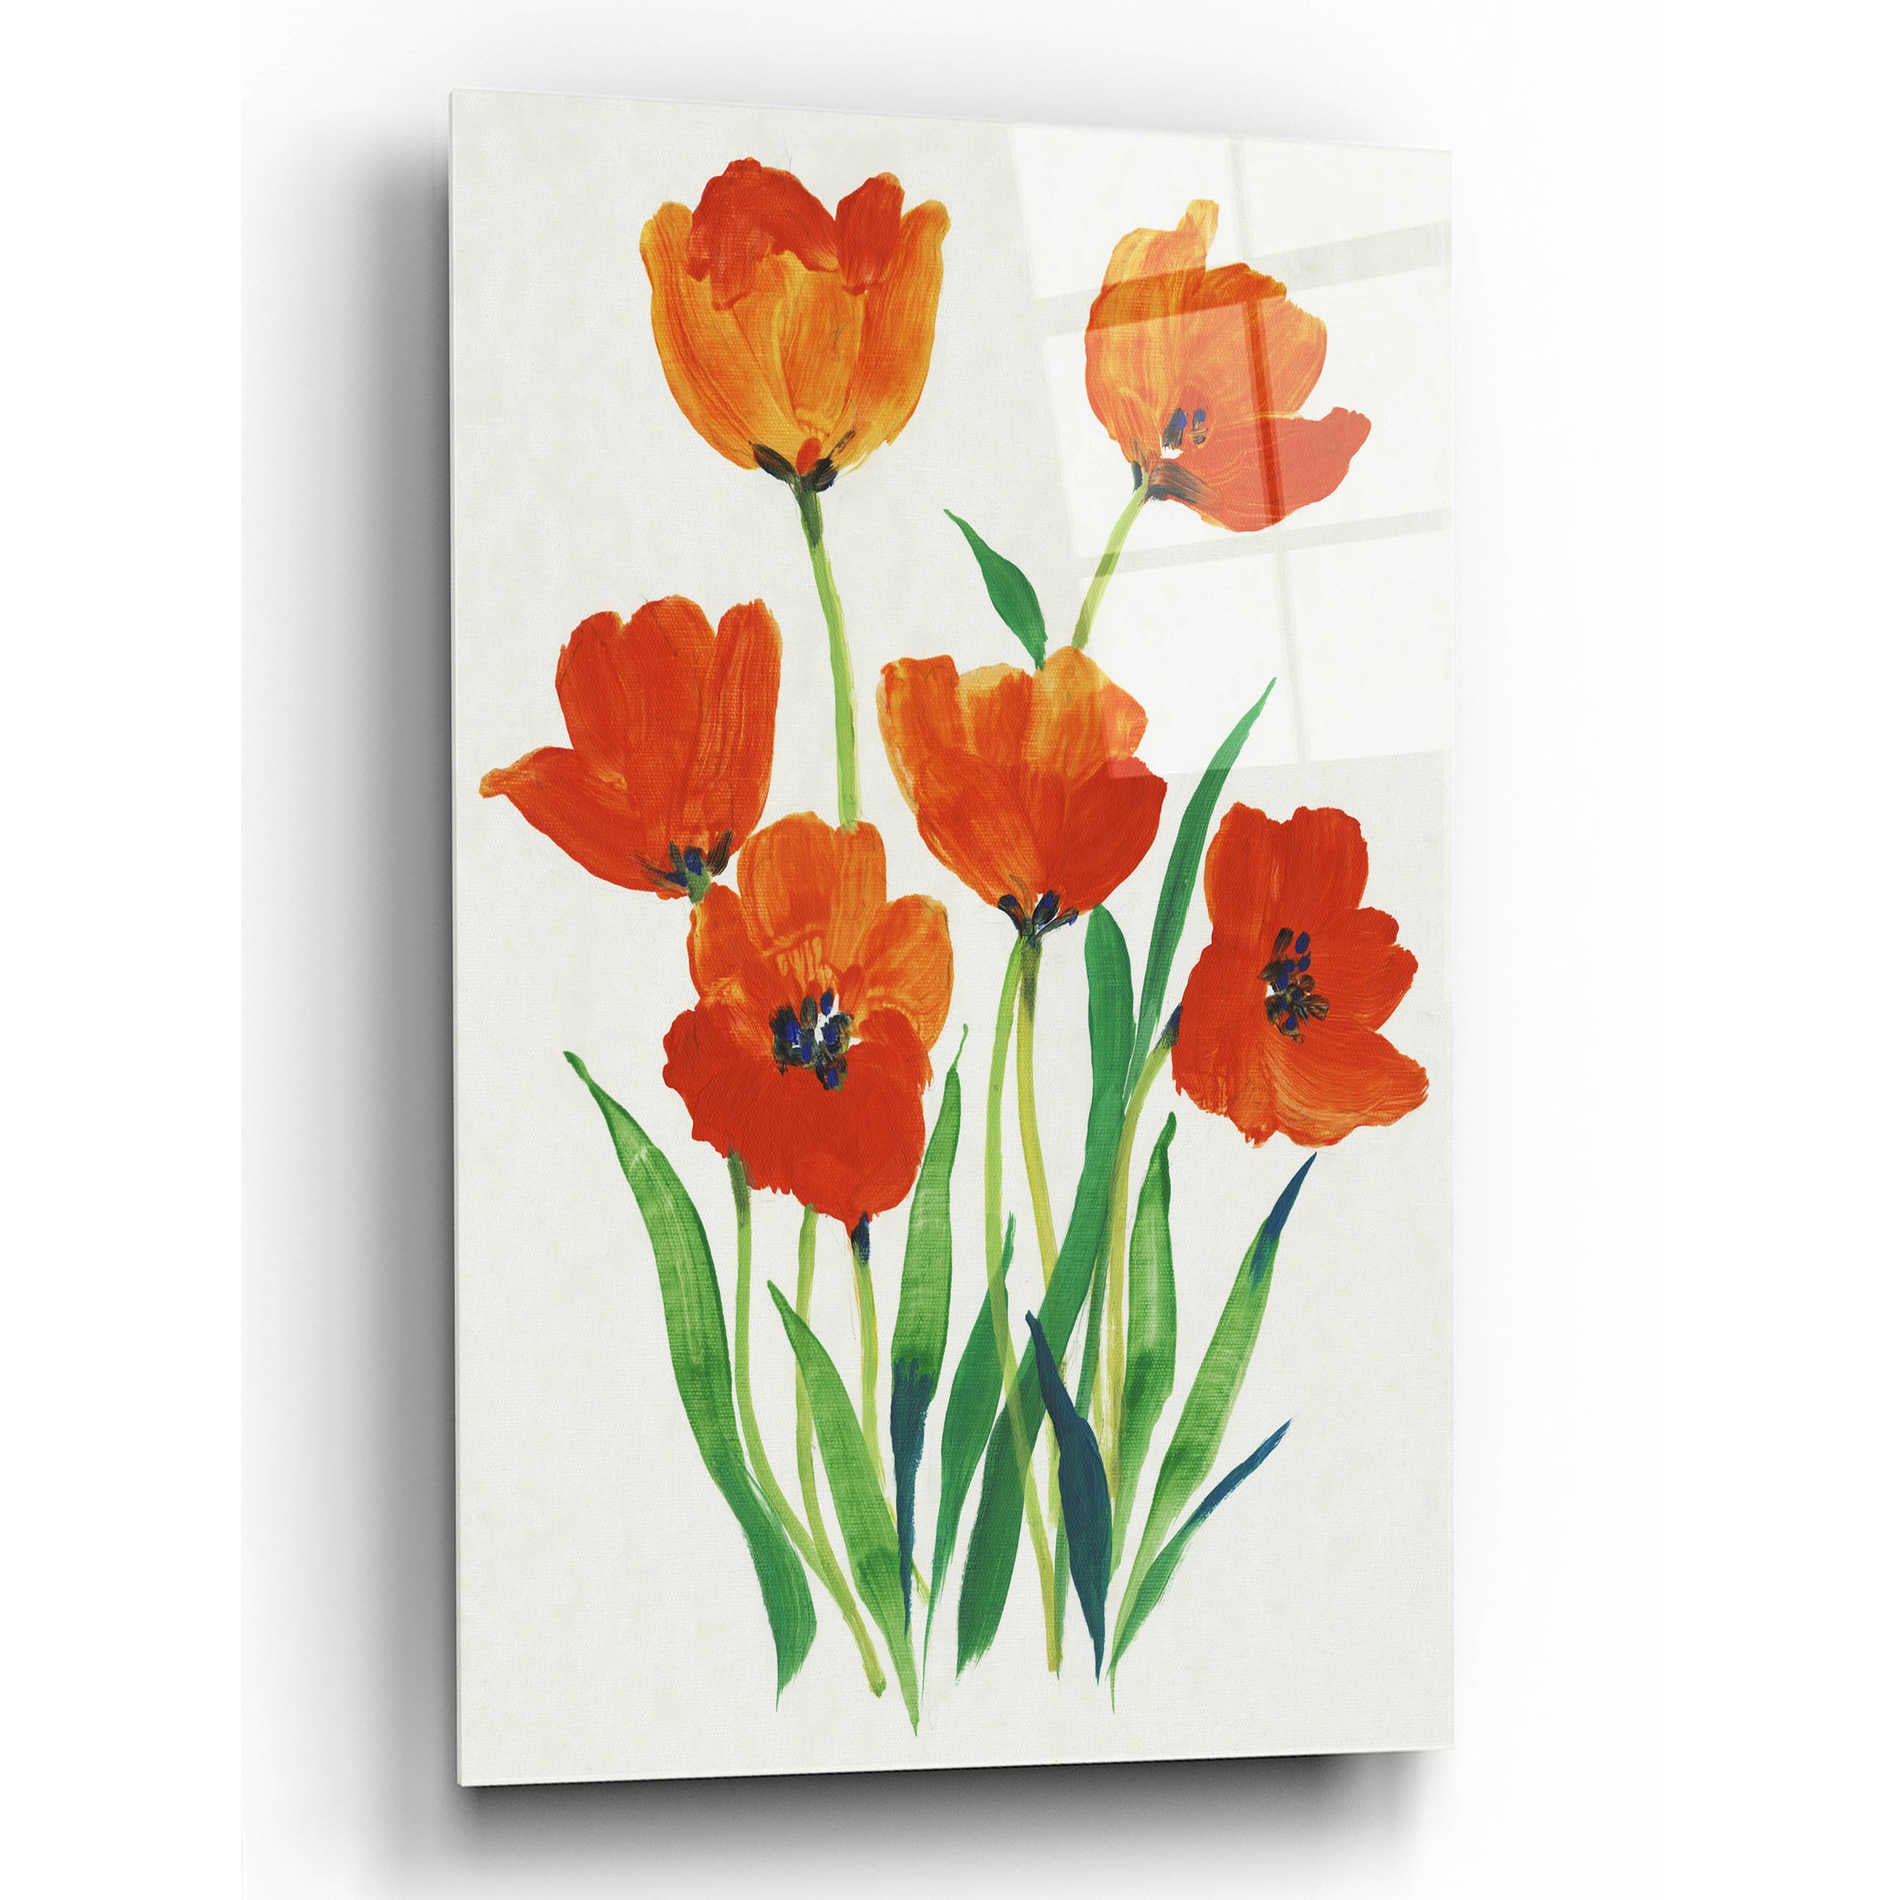 Epic Art 'Red Tulips in Bloom I' by Tim O'Toole, Acrylic Glass Wall Art